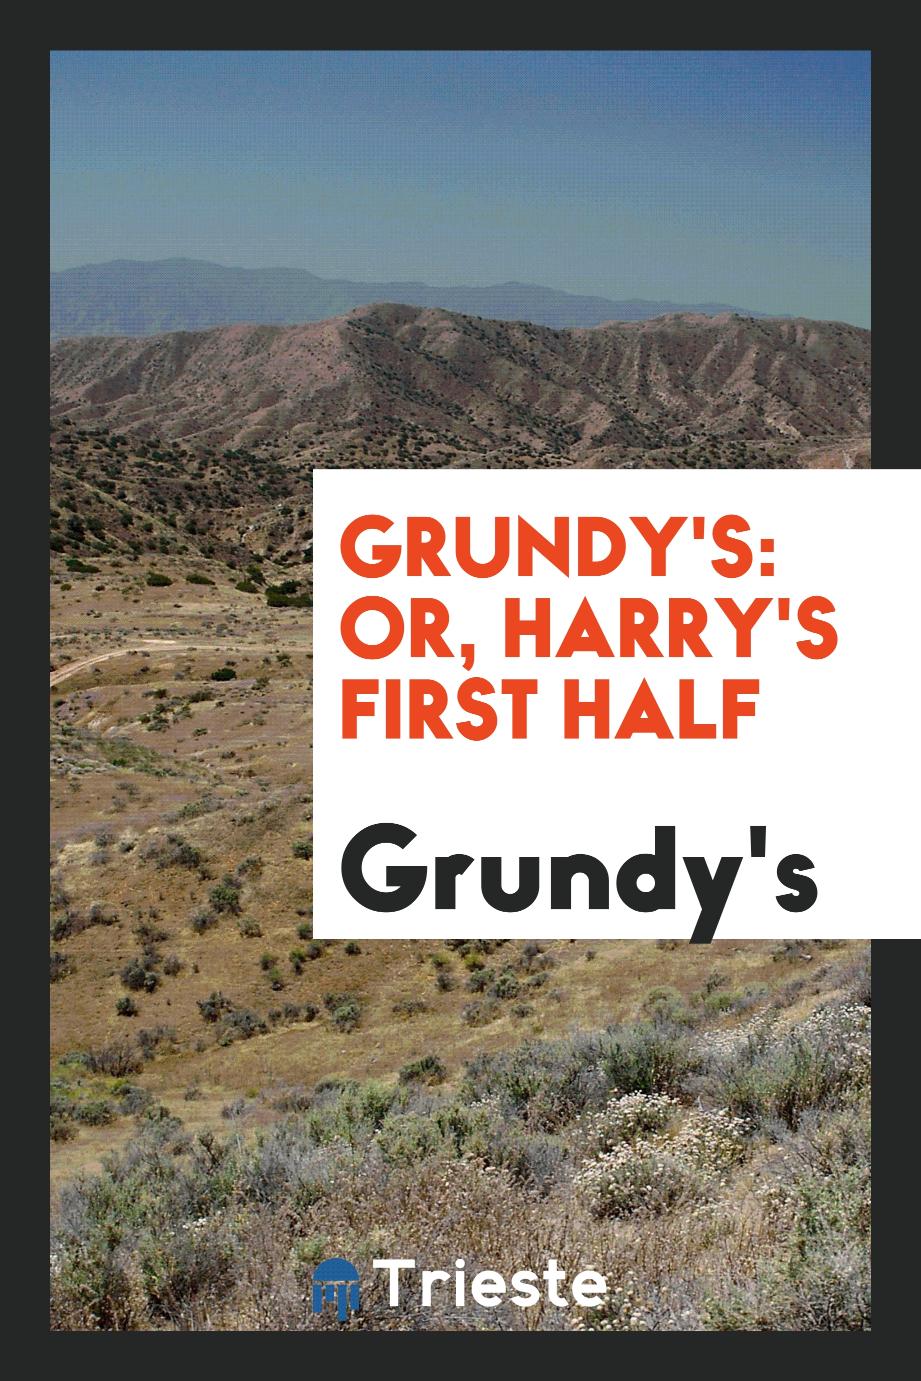 Grundy's: or, Harry's first half